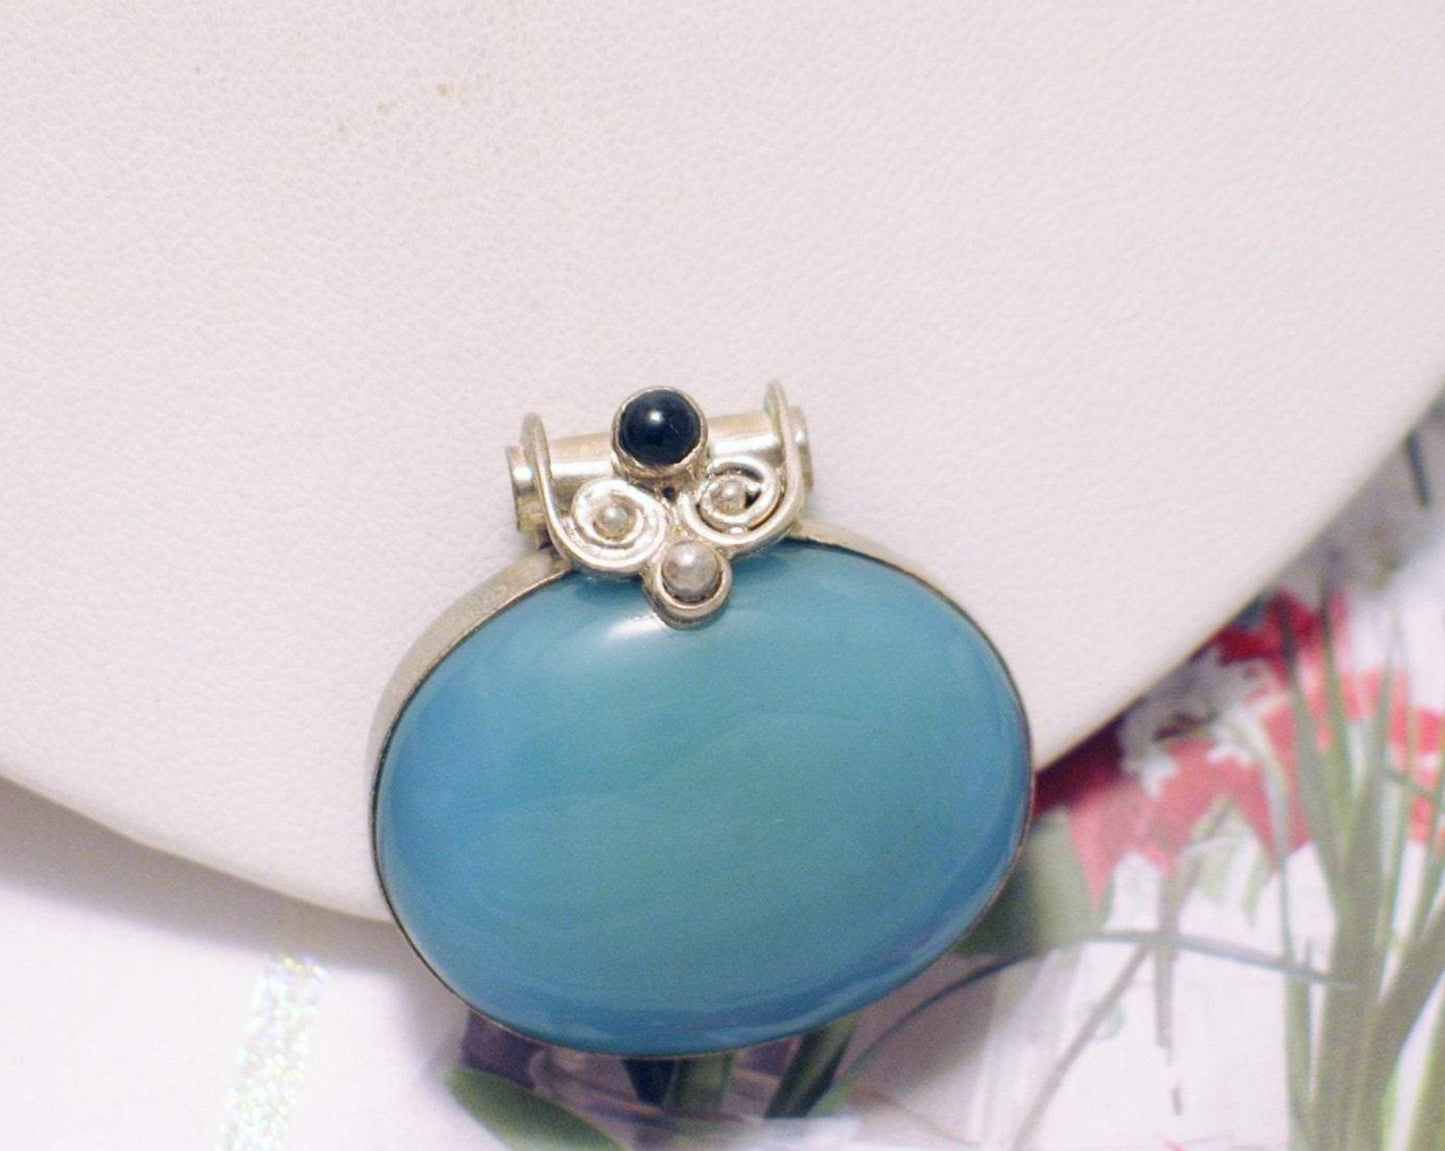 Stone Pendant, Unique Oval Blue Chalcedony Black Onyx Sterling Silver Pendant - Blingschlingers Jewelry